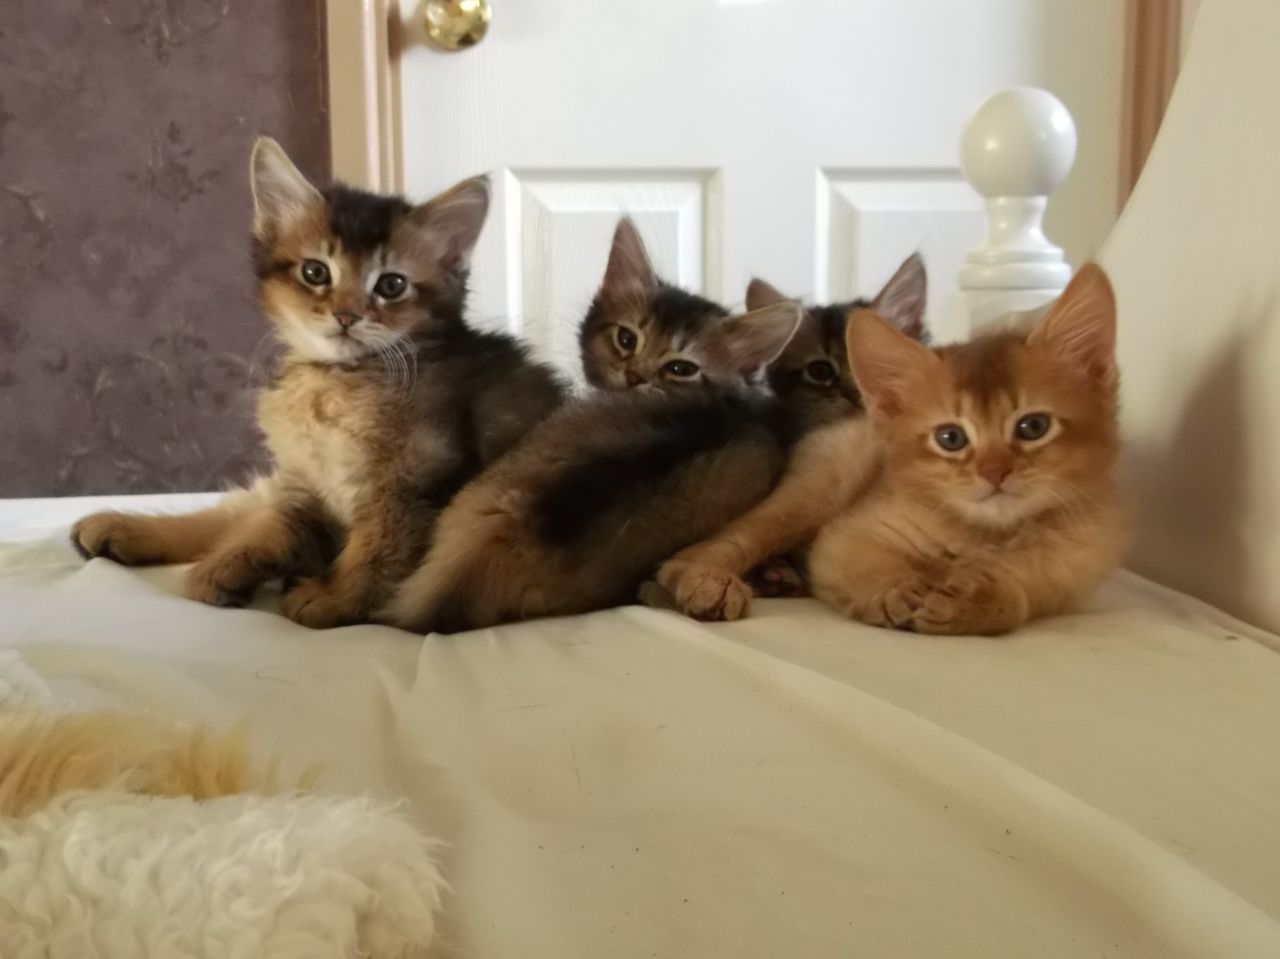 Group Of Somali Kittens Sitting On Bed